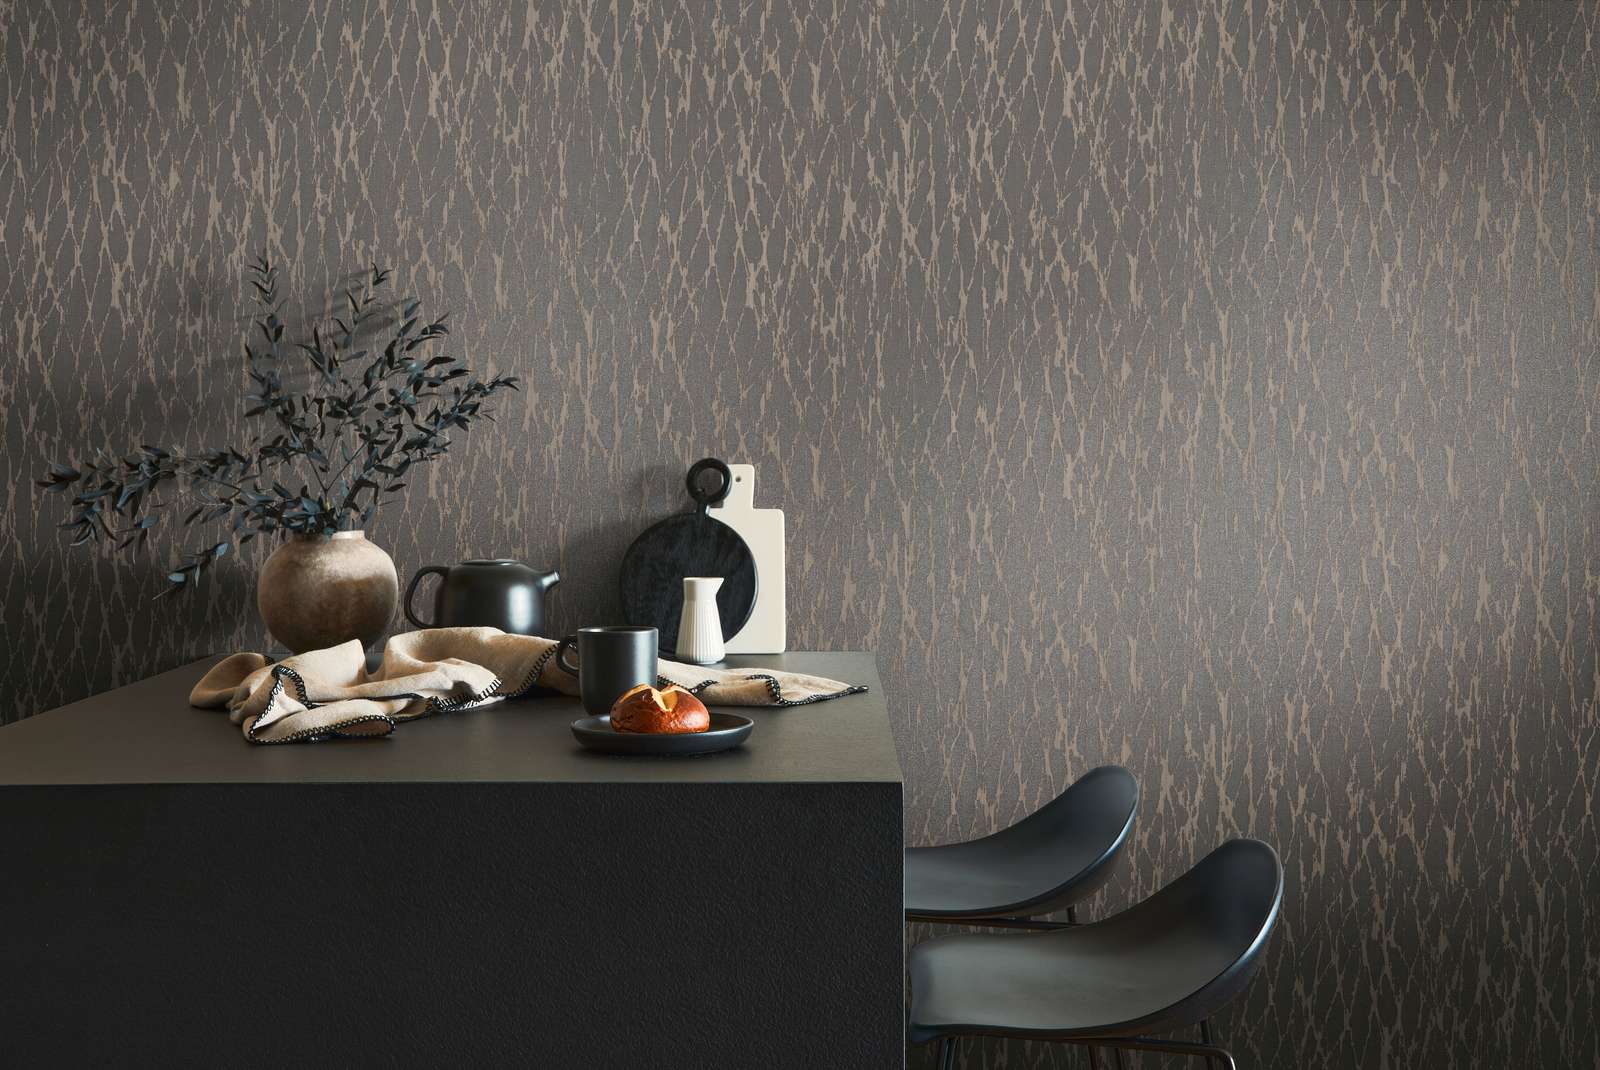             Non-woven wallpaper with wavy line pattern - black, brown, beige
        